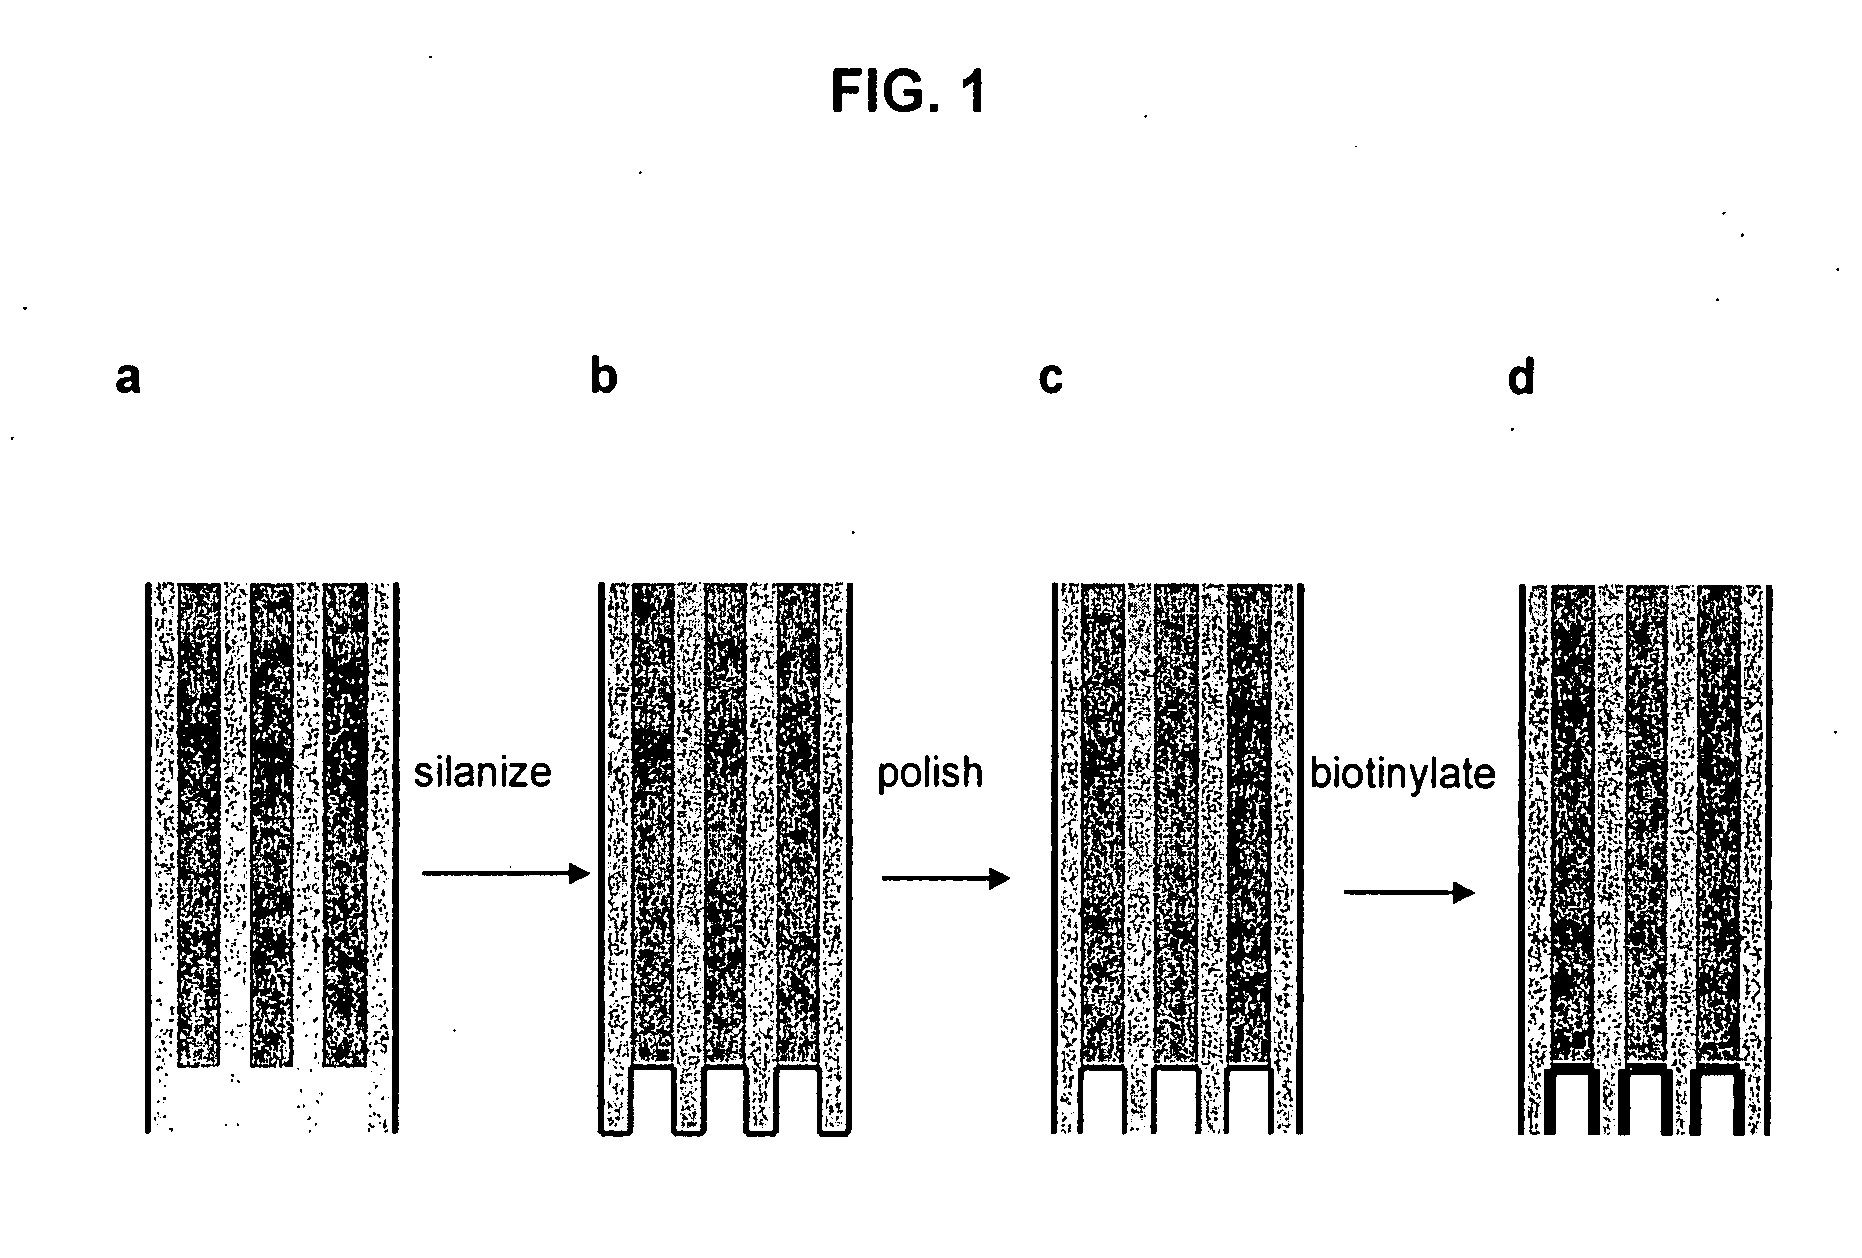 Methods and arrays for target analyte detection and determination of target analyte concentration in solution